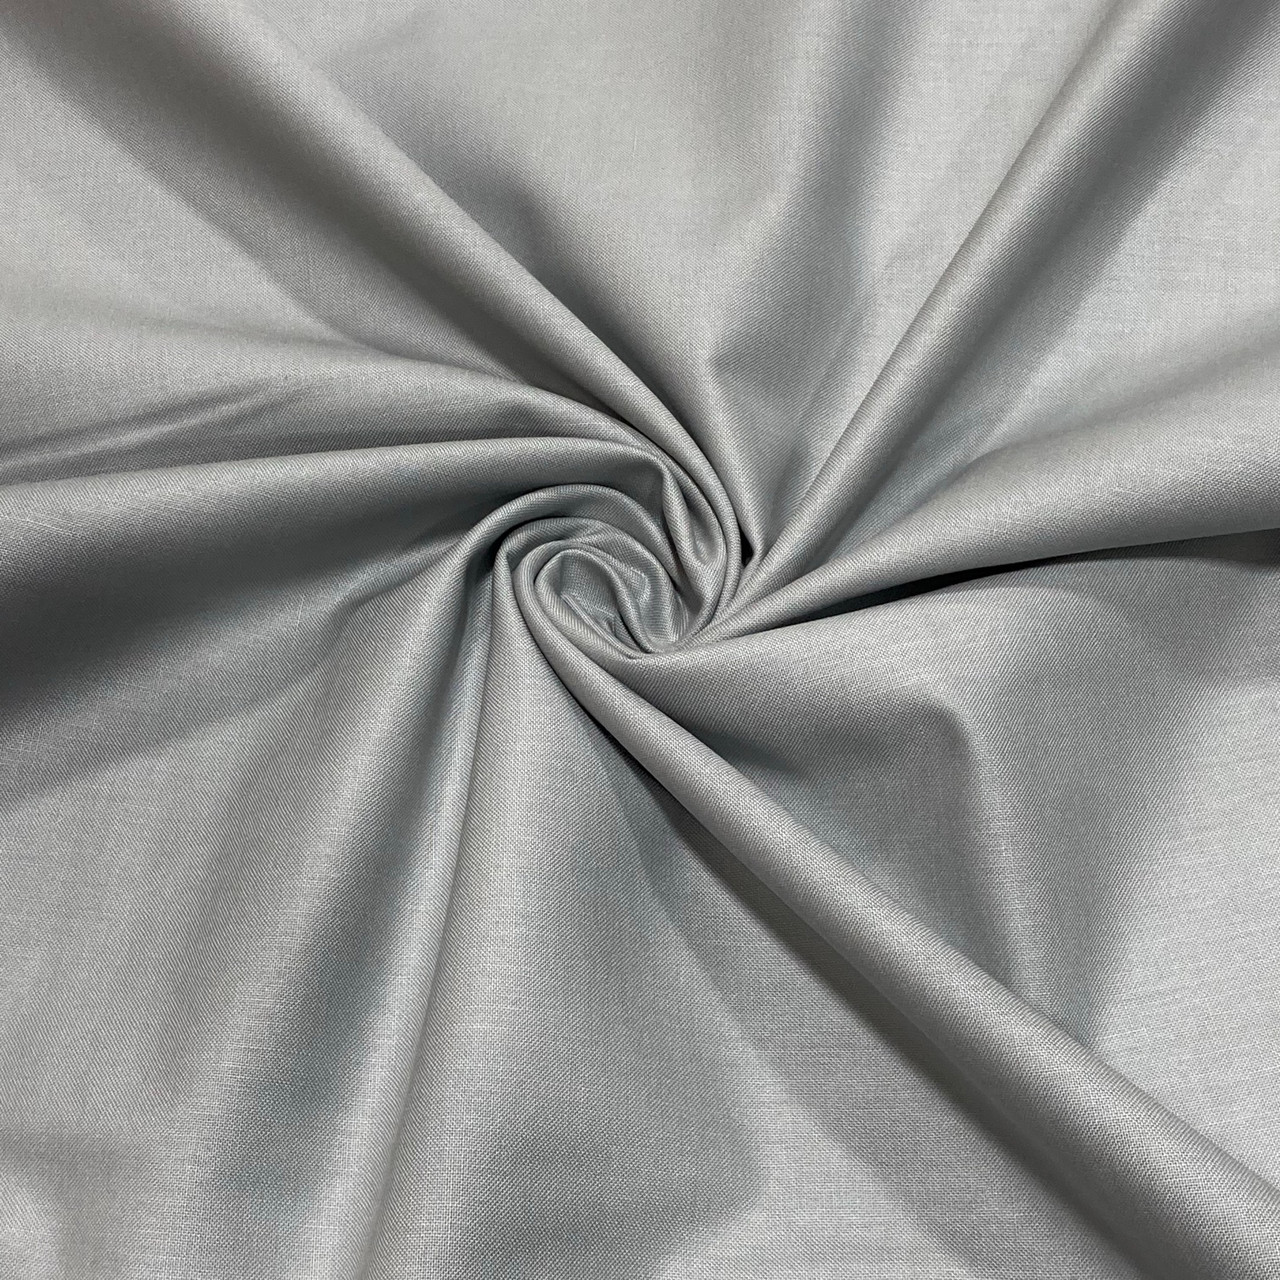 Solid Grey Cotton Sheeting Fabric-Coordinating Grey Solid Cotton Fabric